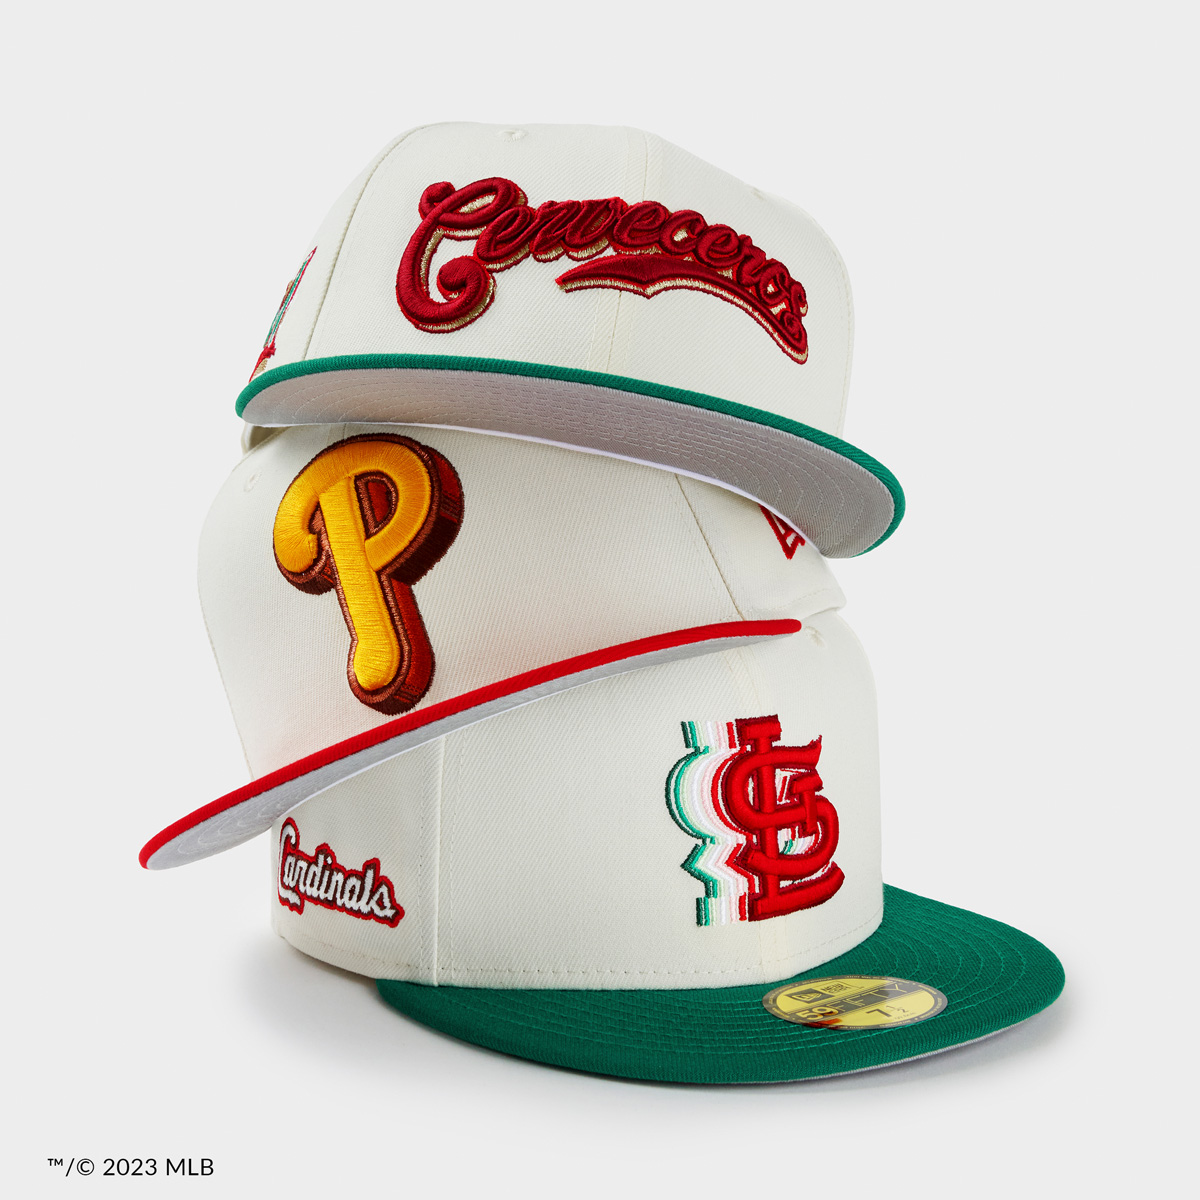 New Era Cap on X: The MLB Cinco de Mayo collection features